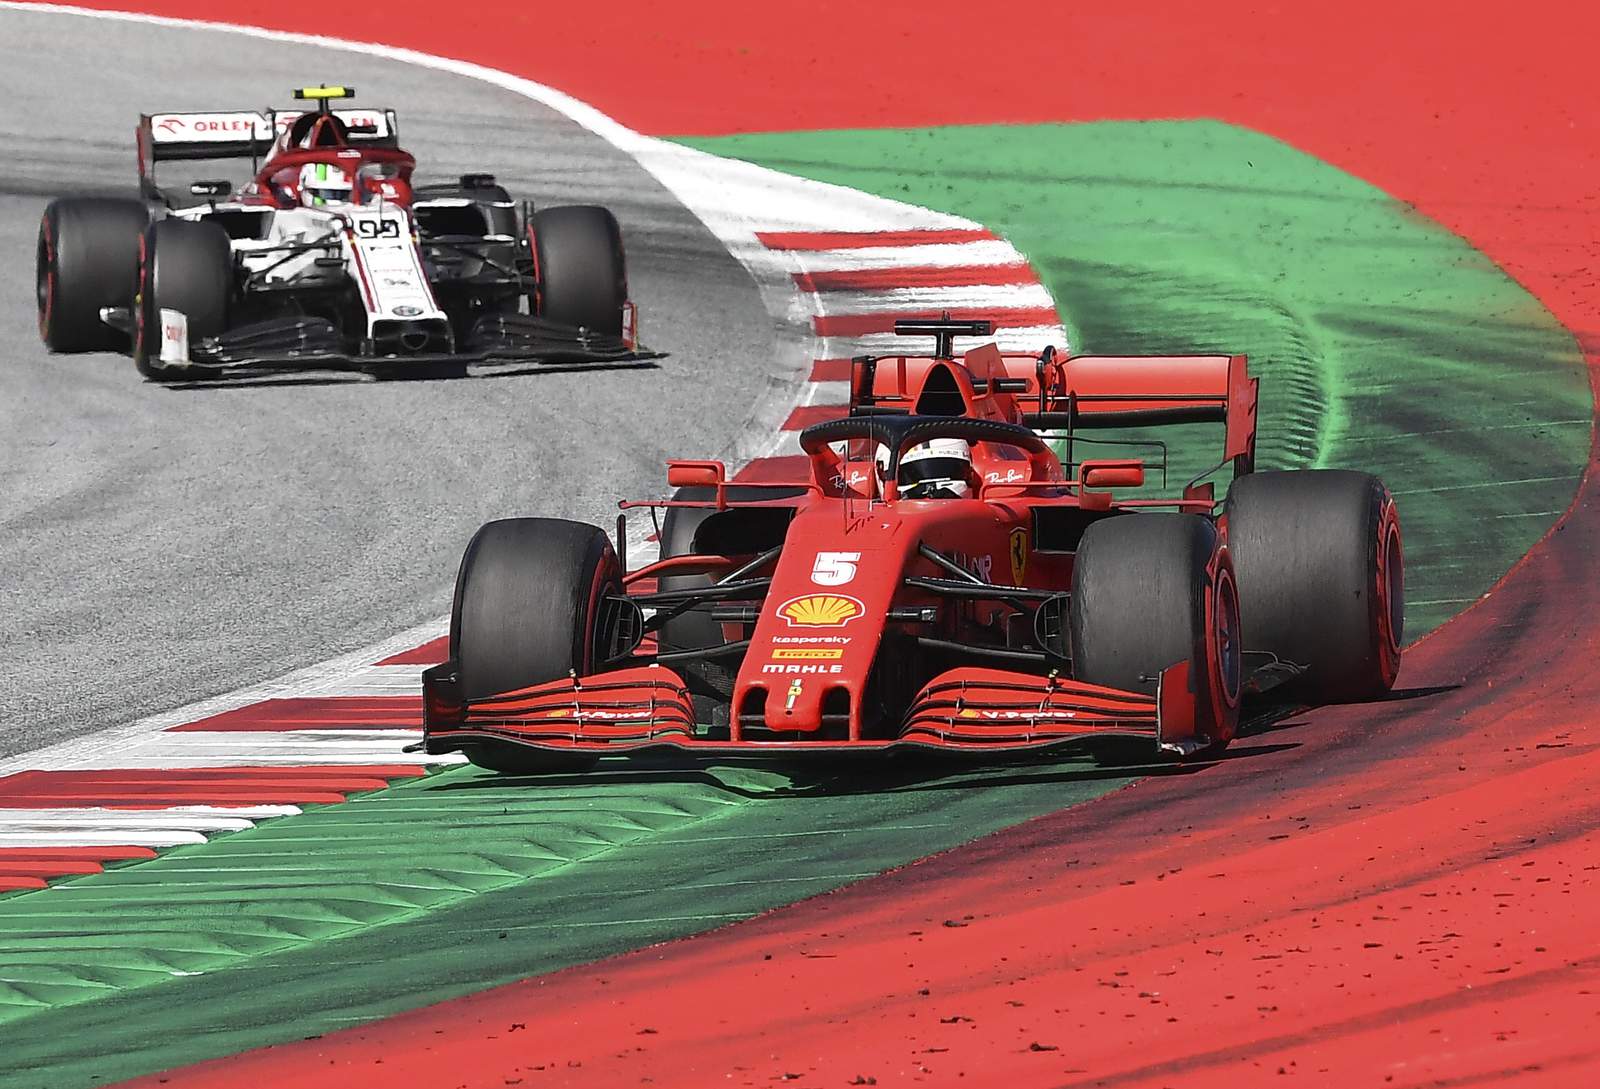 Pressure is mounting on Ferrari after one race of F1 season